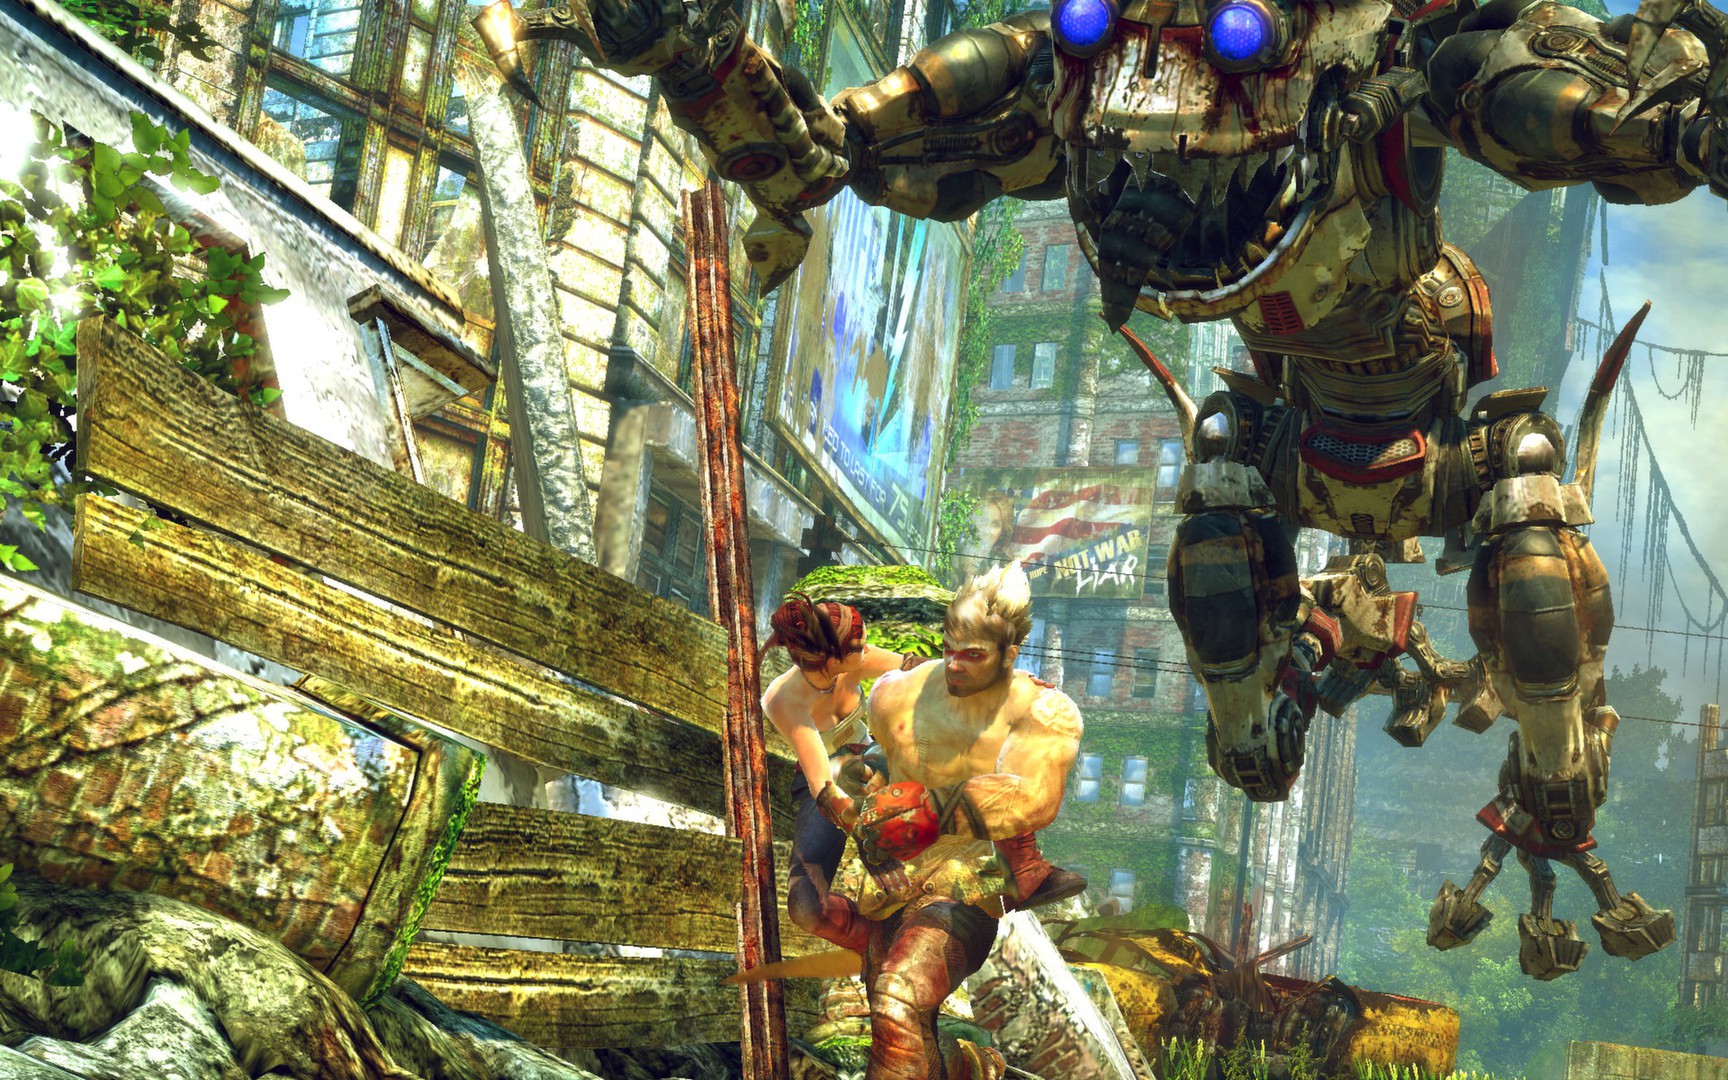 enslaved odyssey to the west download free